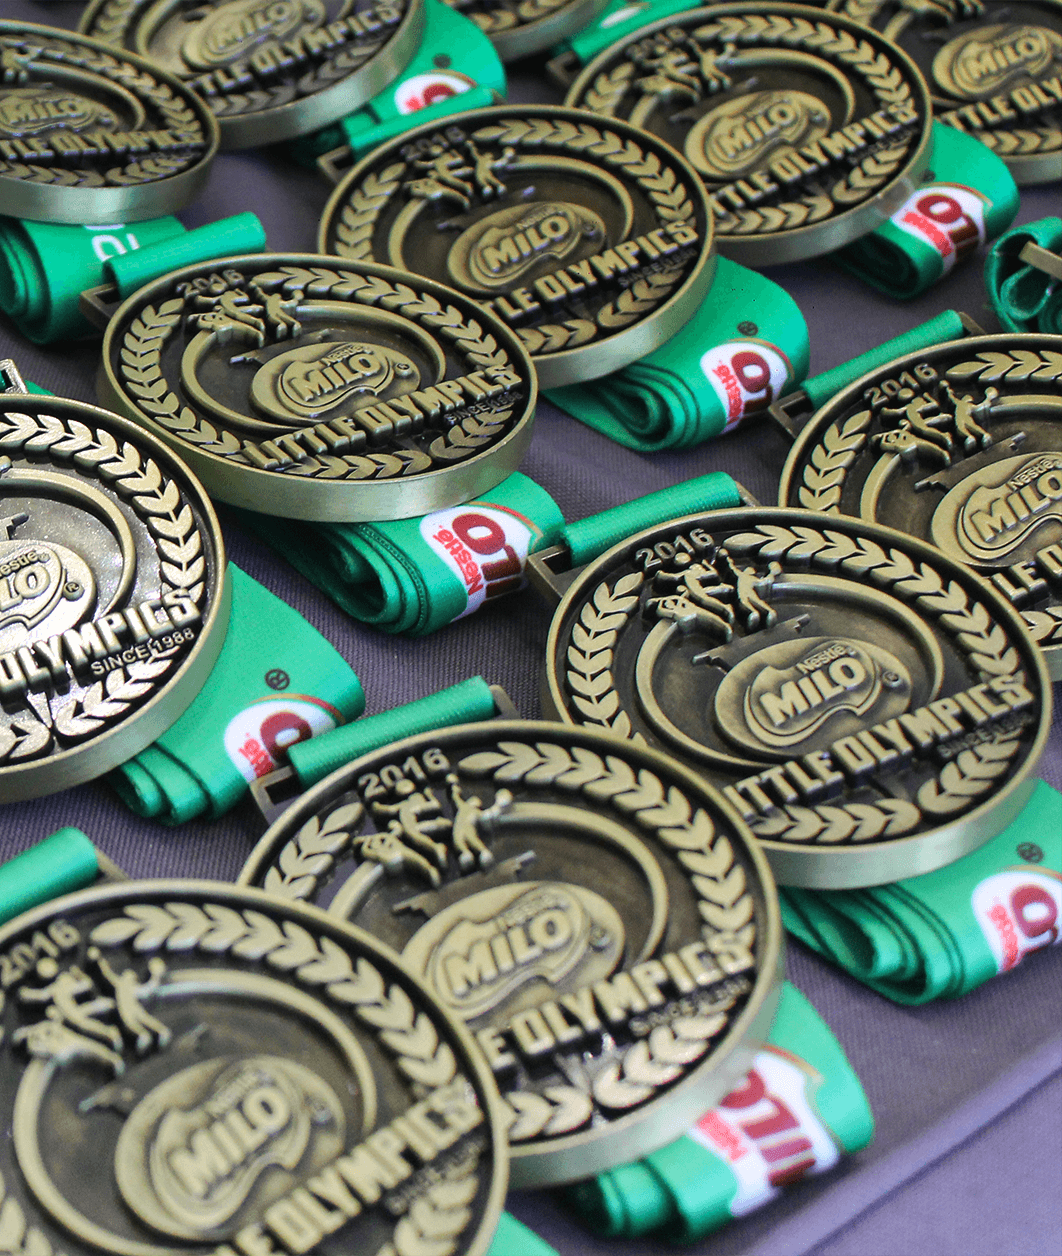 milo little olympics medals